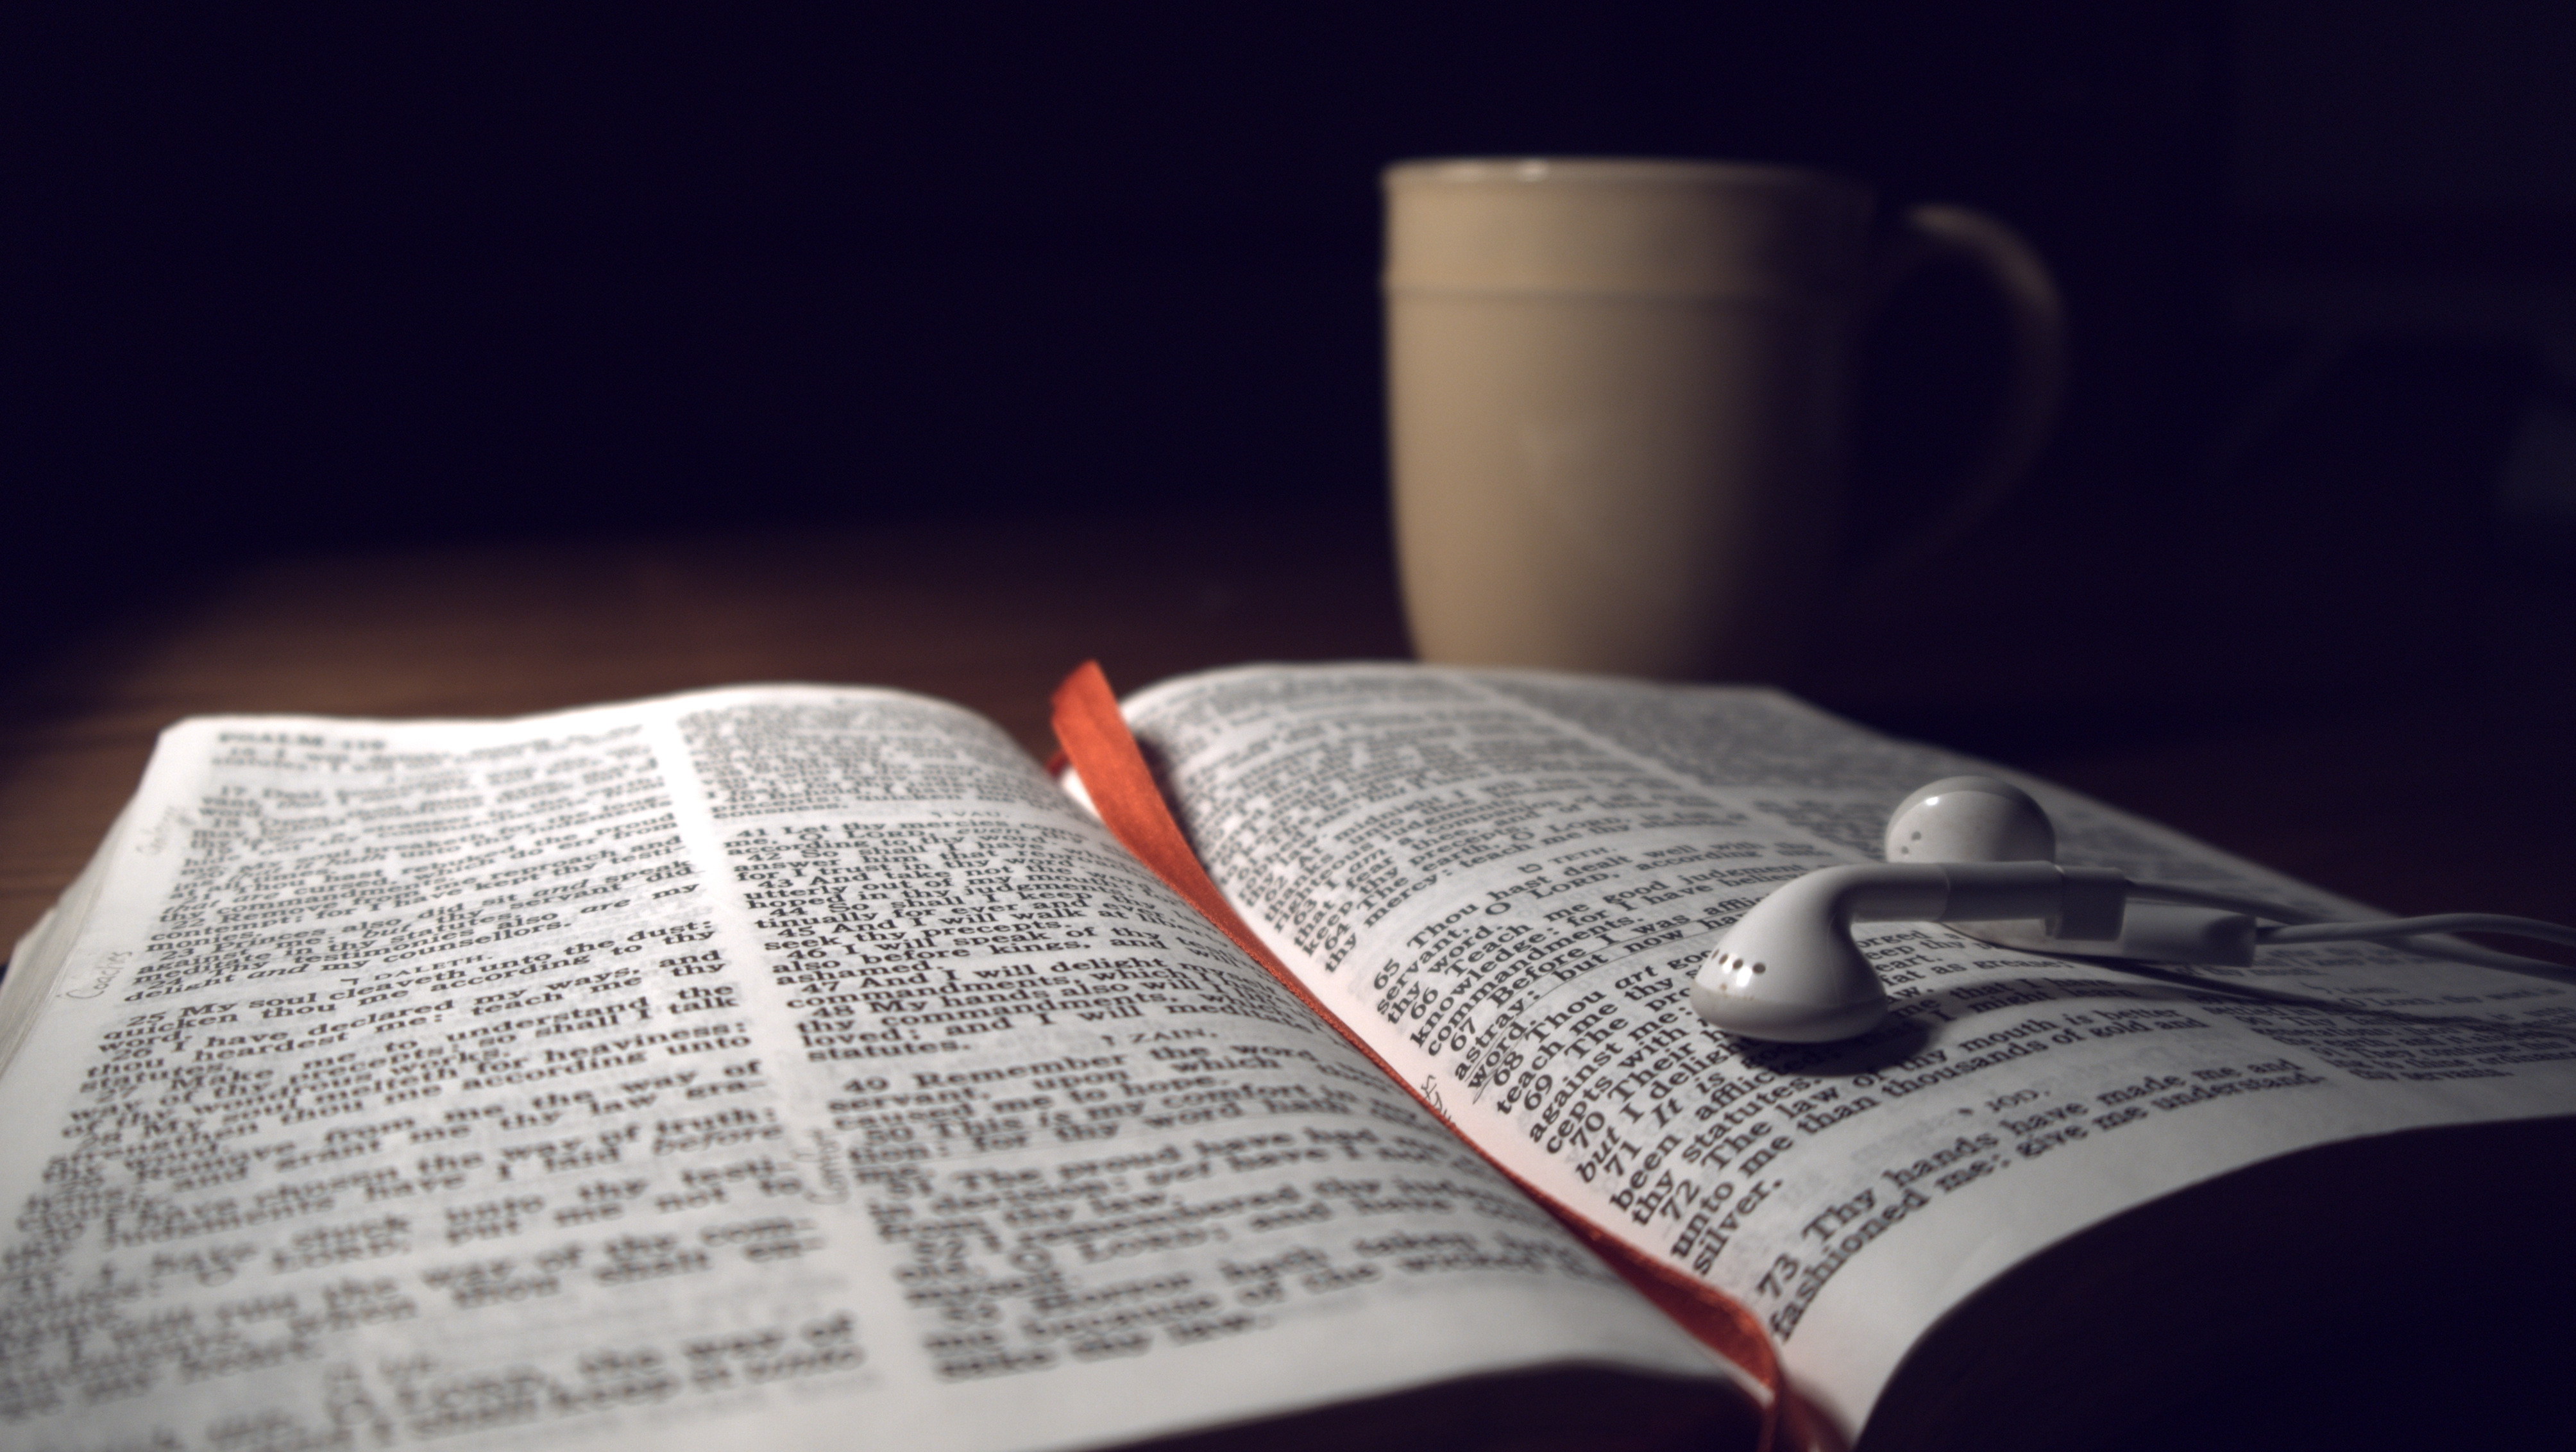 Digging Daily into God's Word